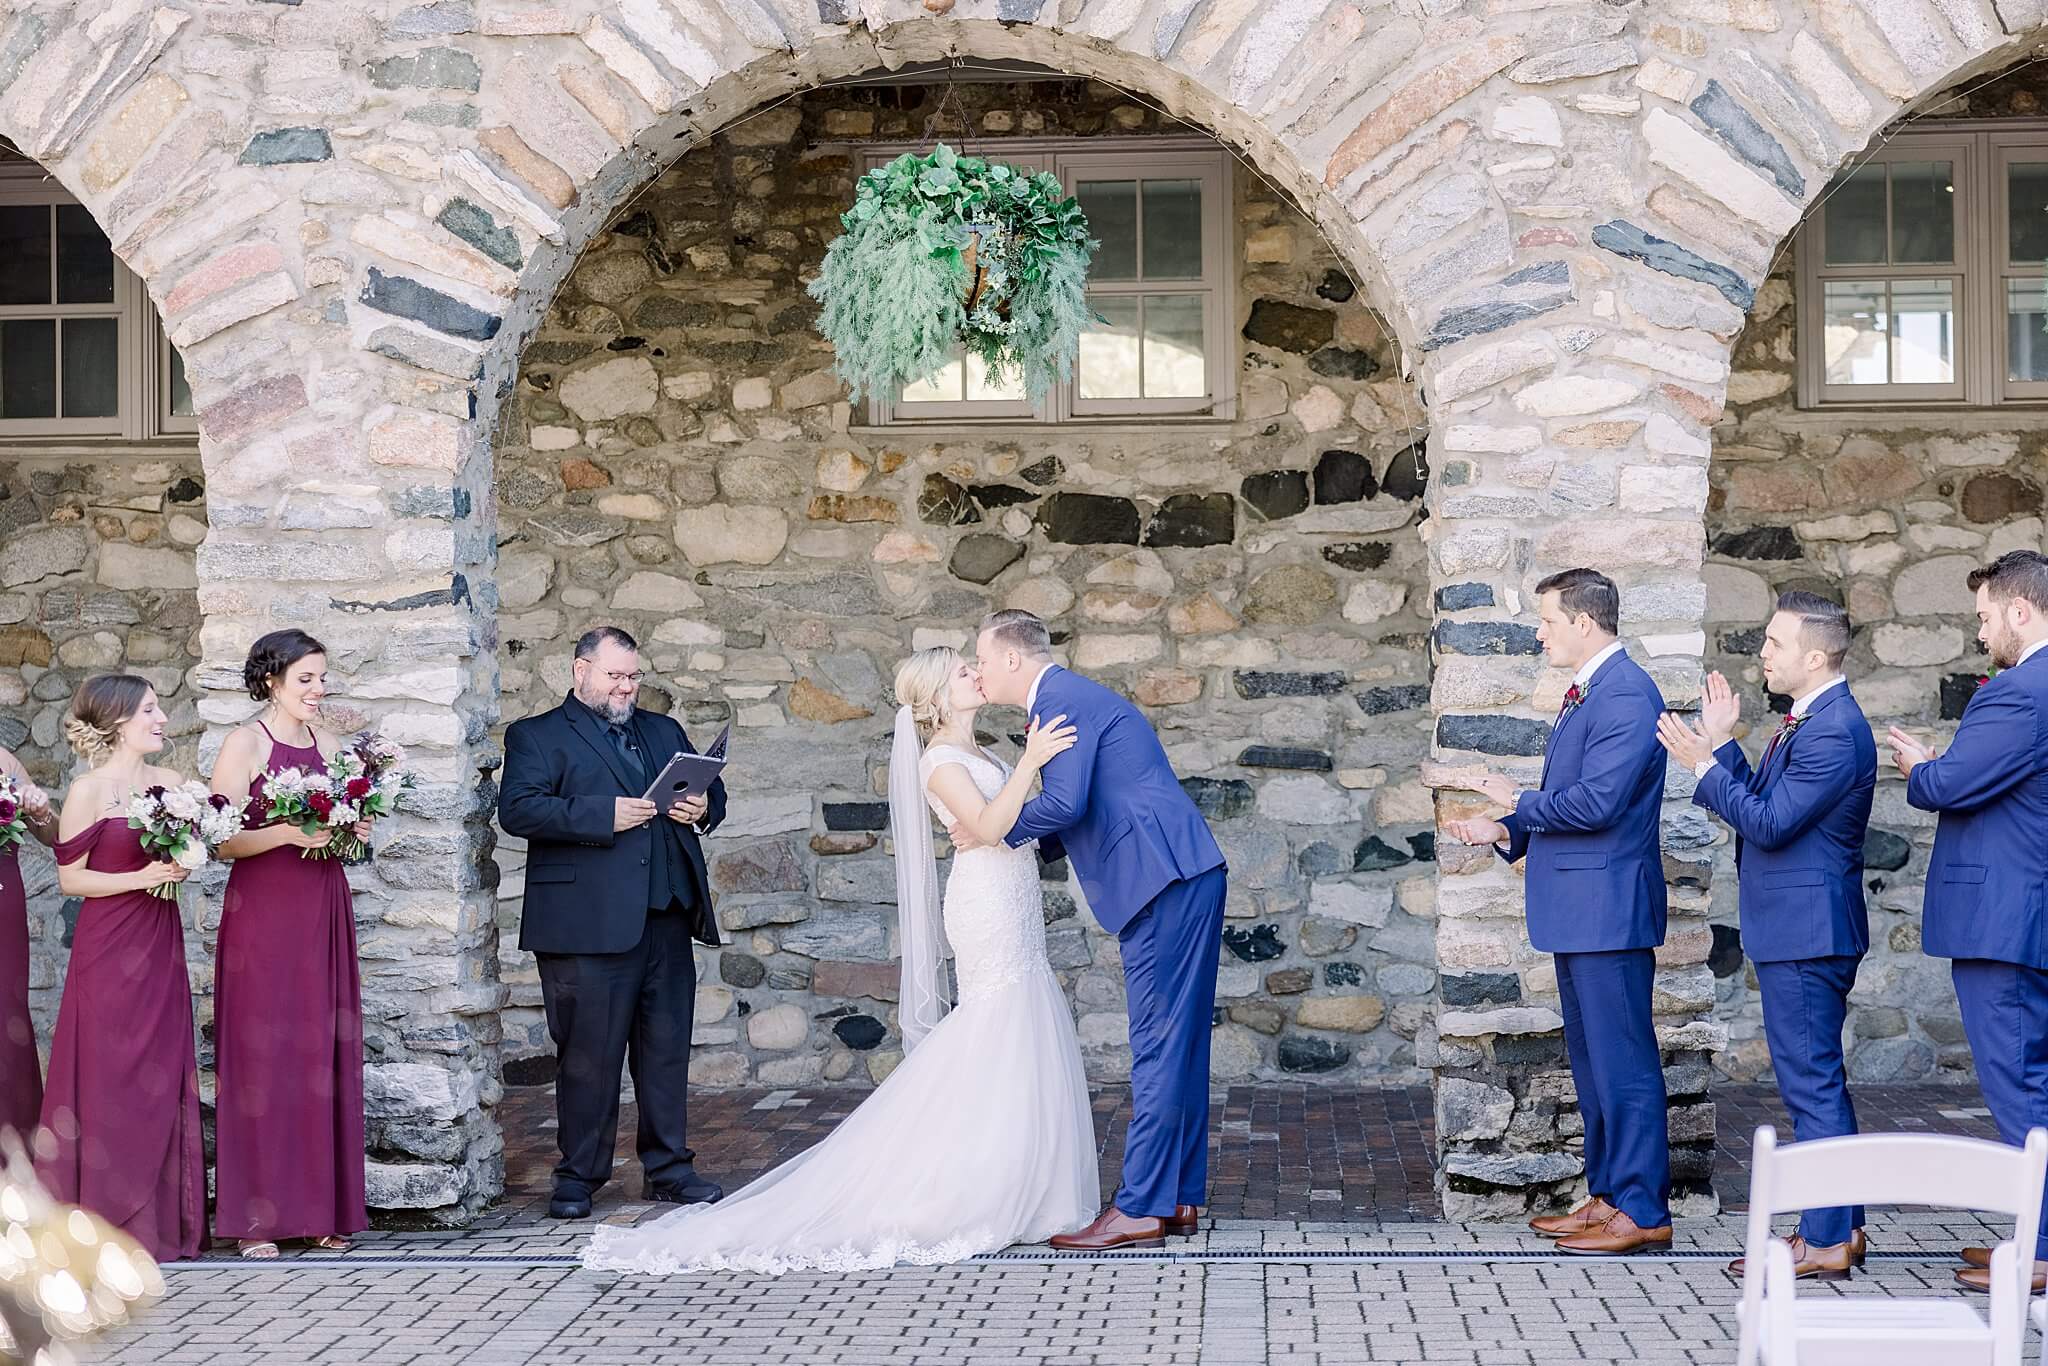 Bride and groom share first kiss during their Queen's Courtyard wedding at Castle Farms.